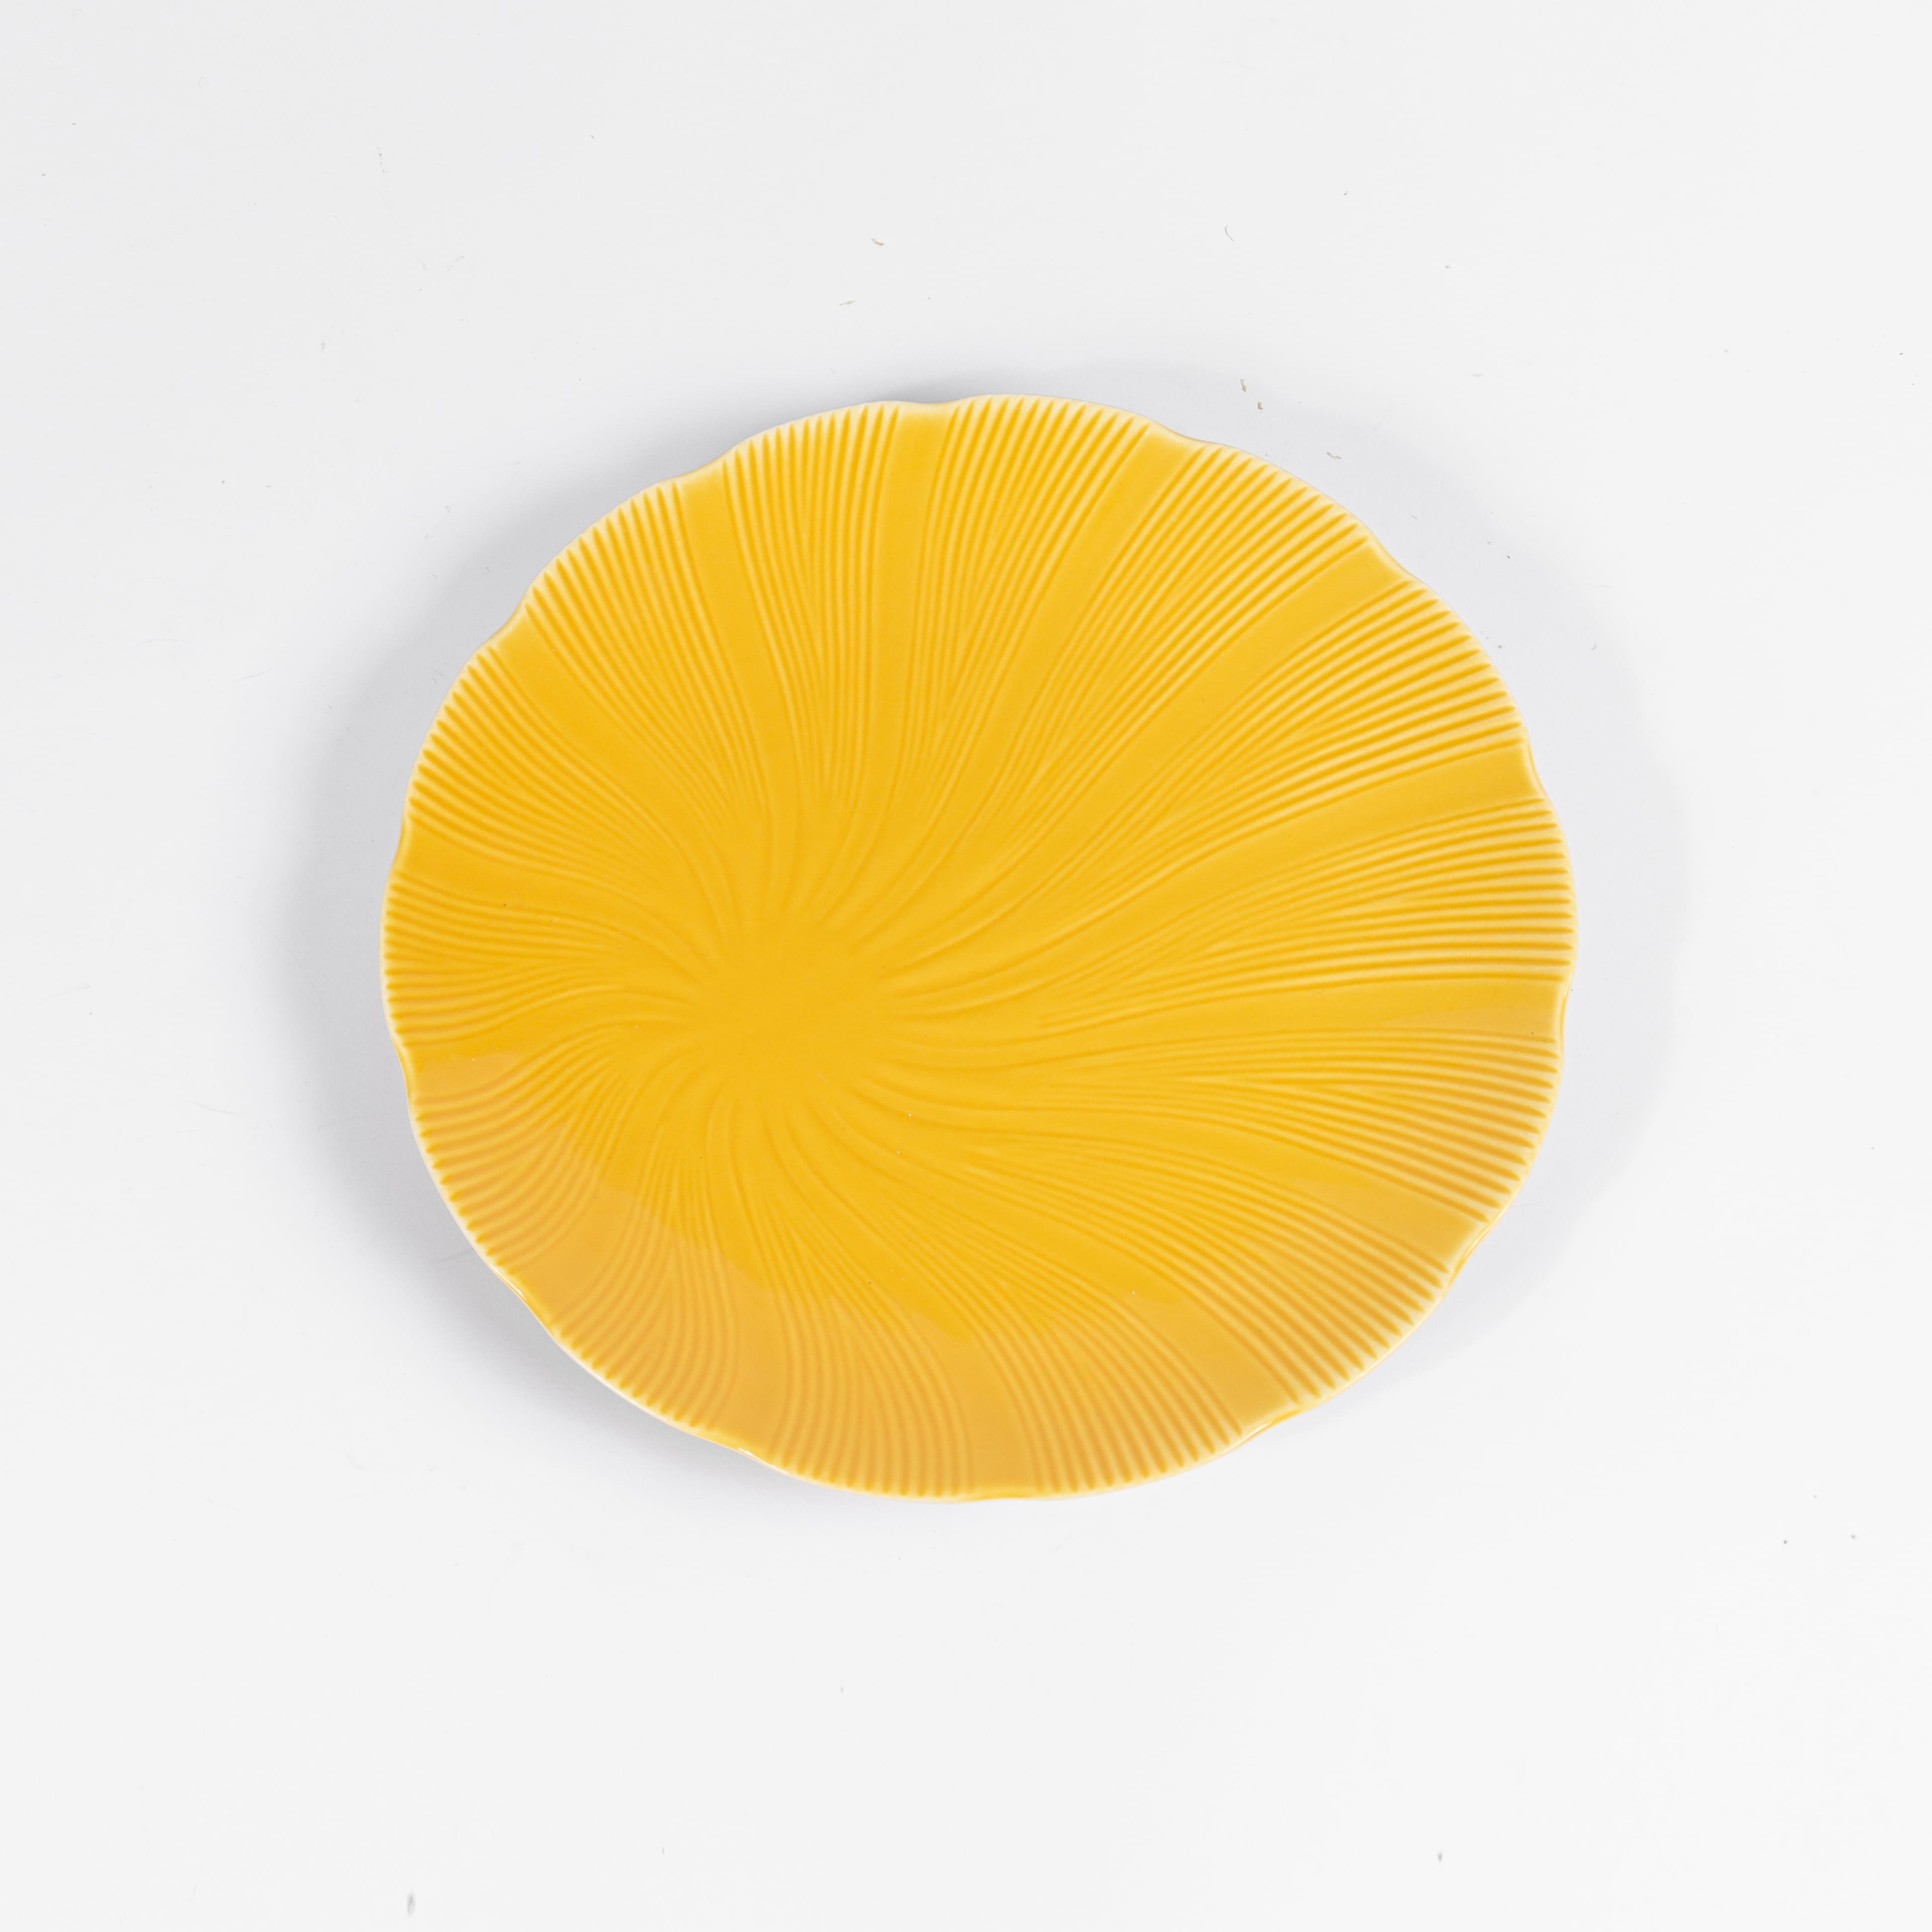 L'assiette plate jaune solaireCollection Tahiti